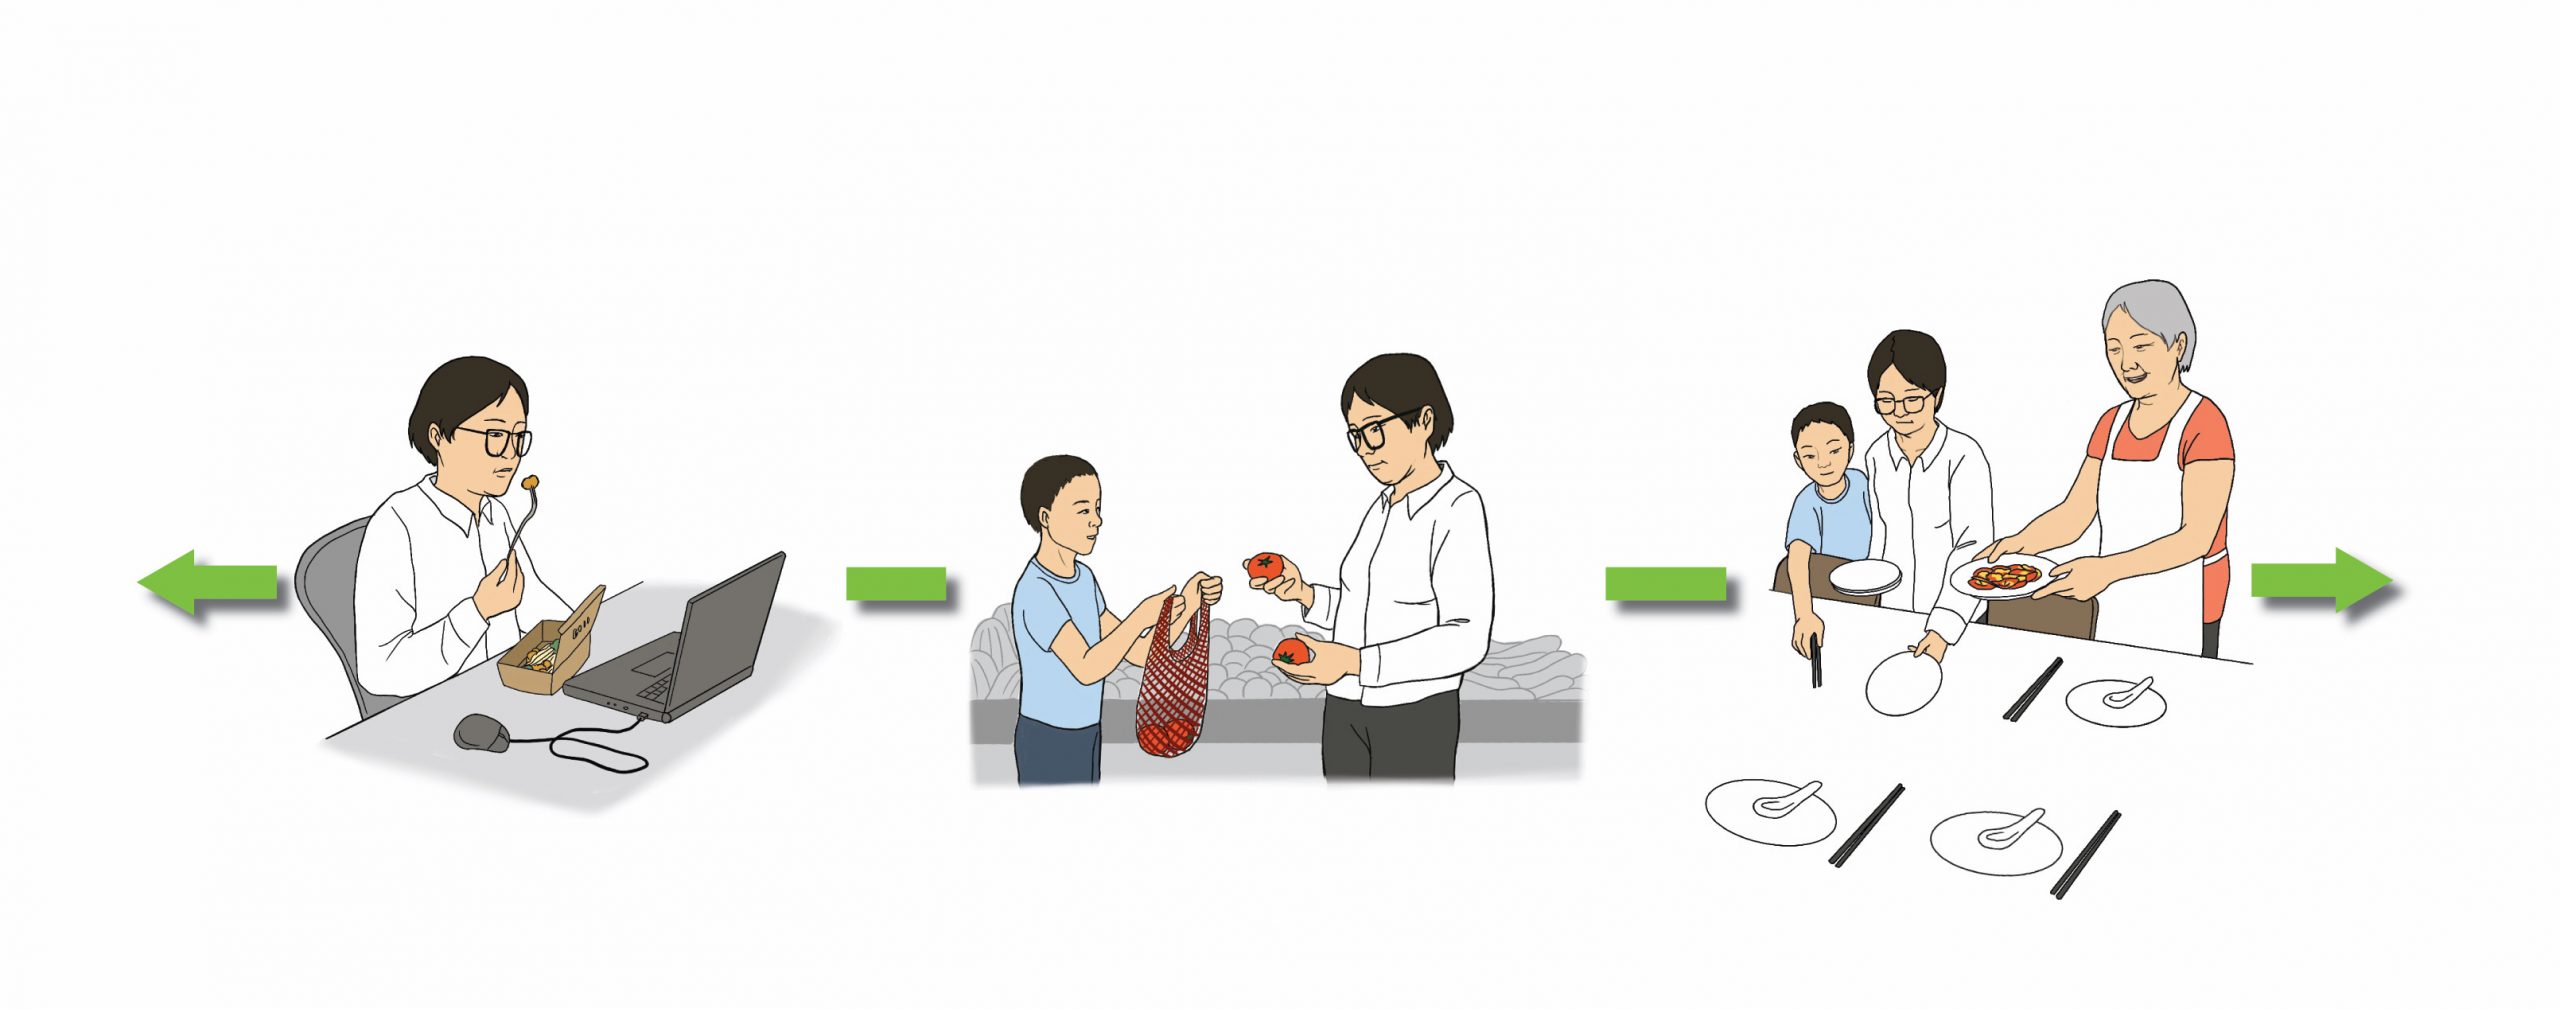 Healthy eating on a continuum. On the left, person eating alone from a fast food container while working at an office. In the middle, person shopping for healthy food with a child. On the right, a family preparing food together.